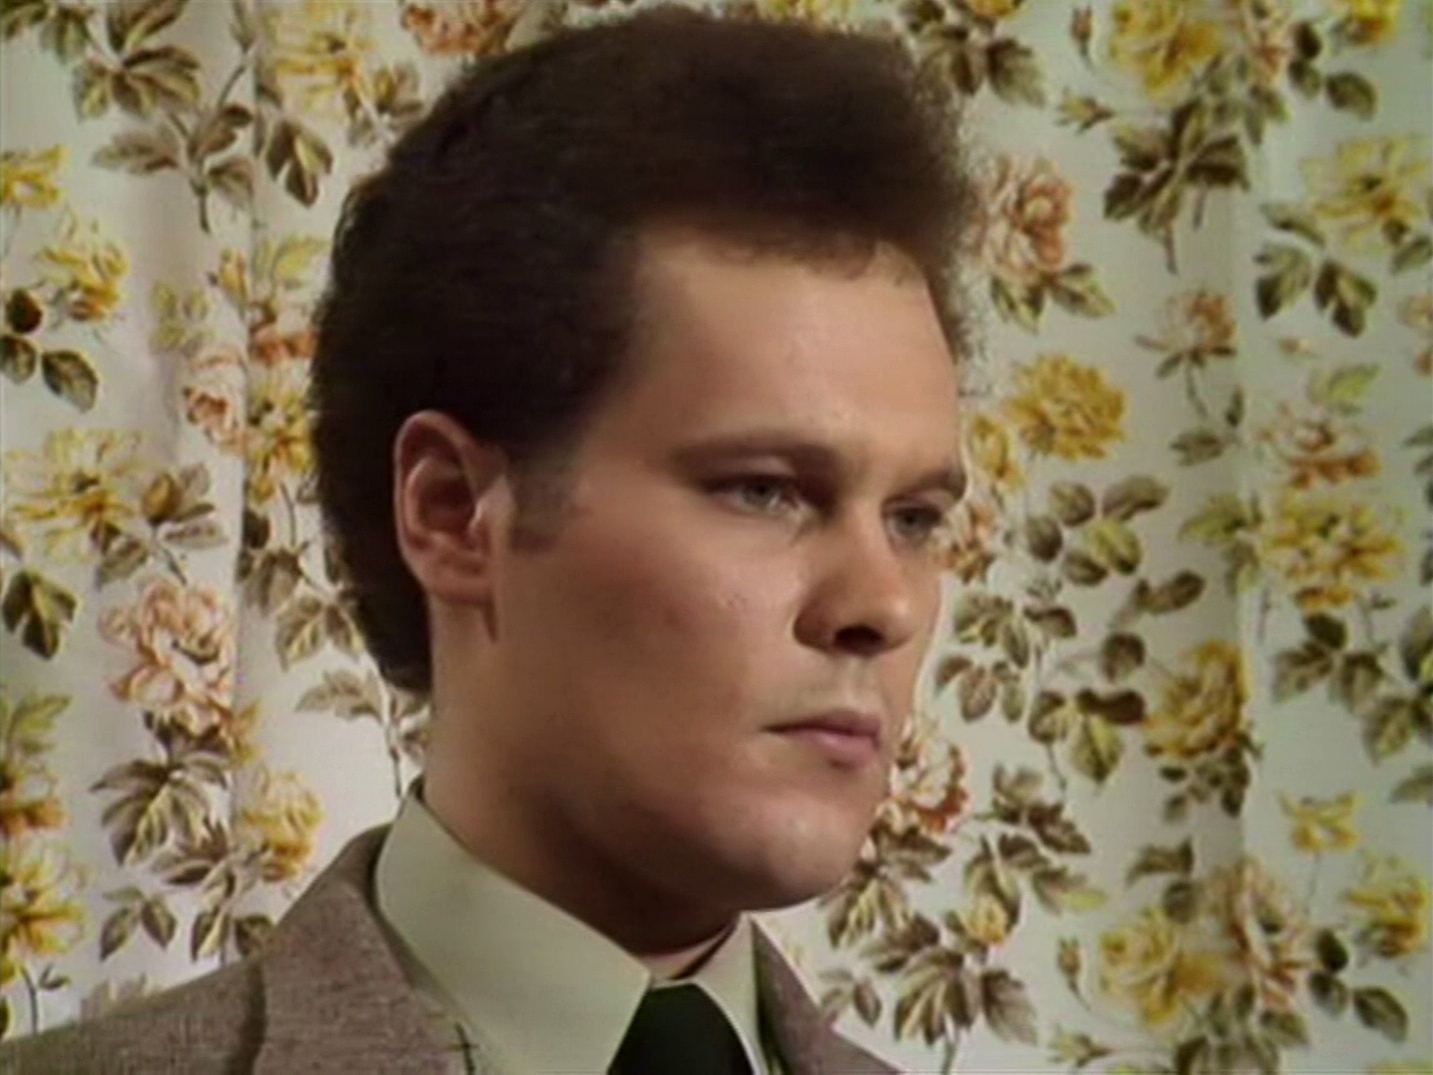 Screenshot from the 1981 ‘Bosom Friends’ episode of Tales of the Unexpected (1979-1988) (7) featuring Aaron Shirley